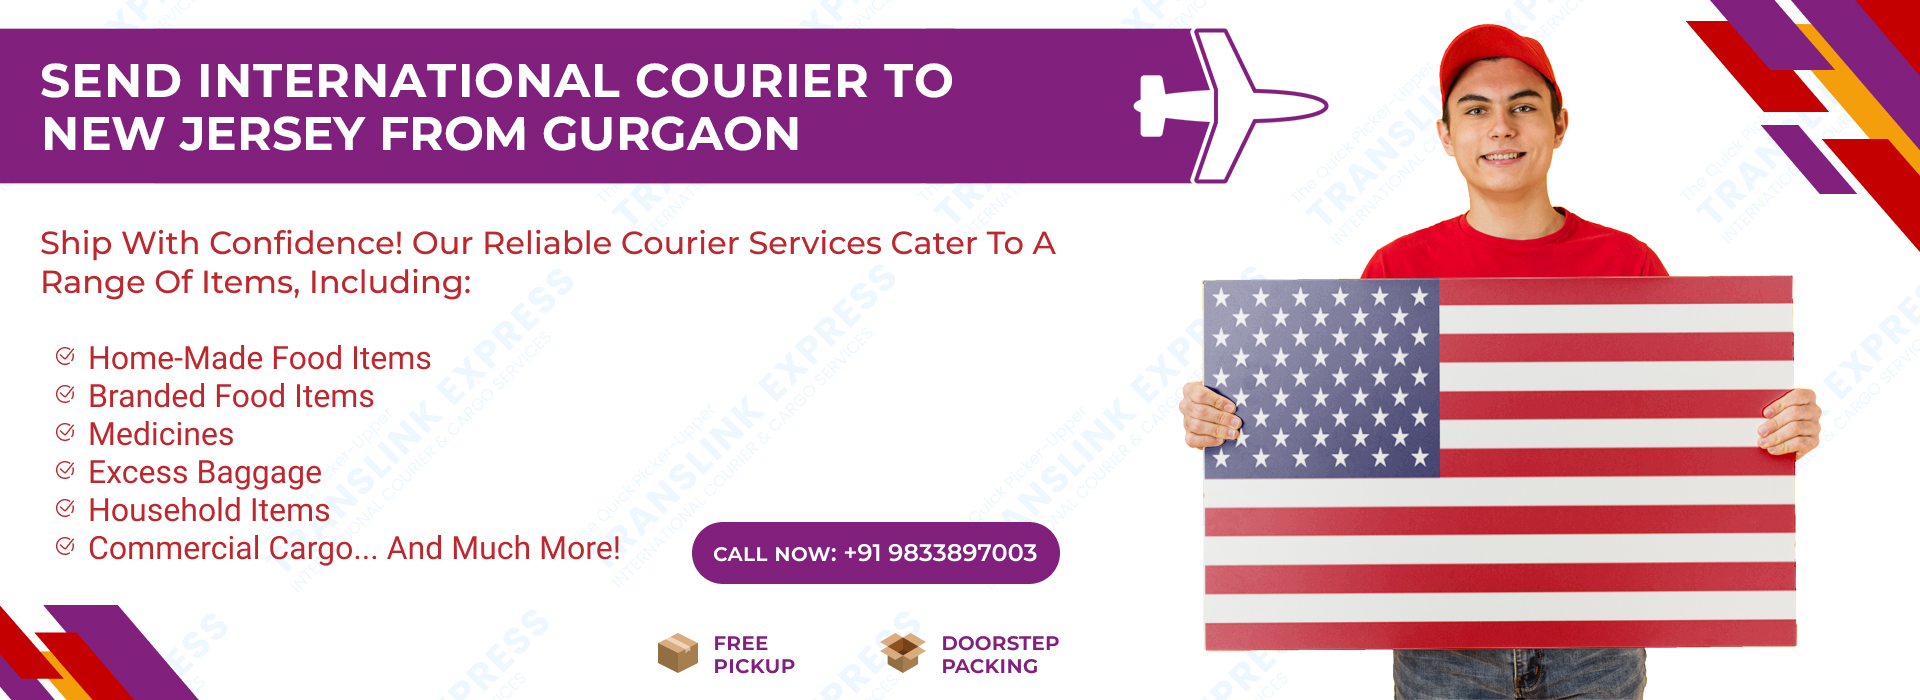 Courier to New Jersey From Gurgaon